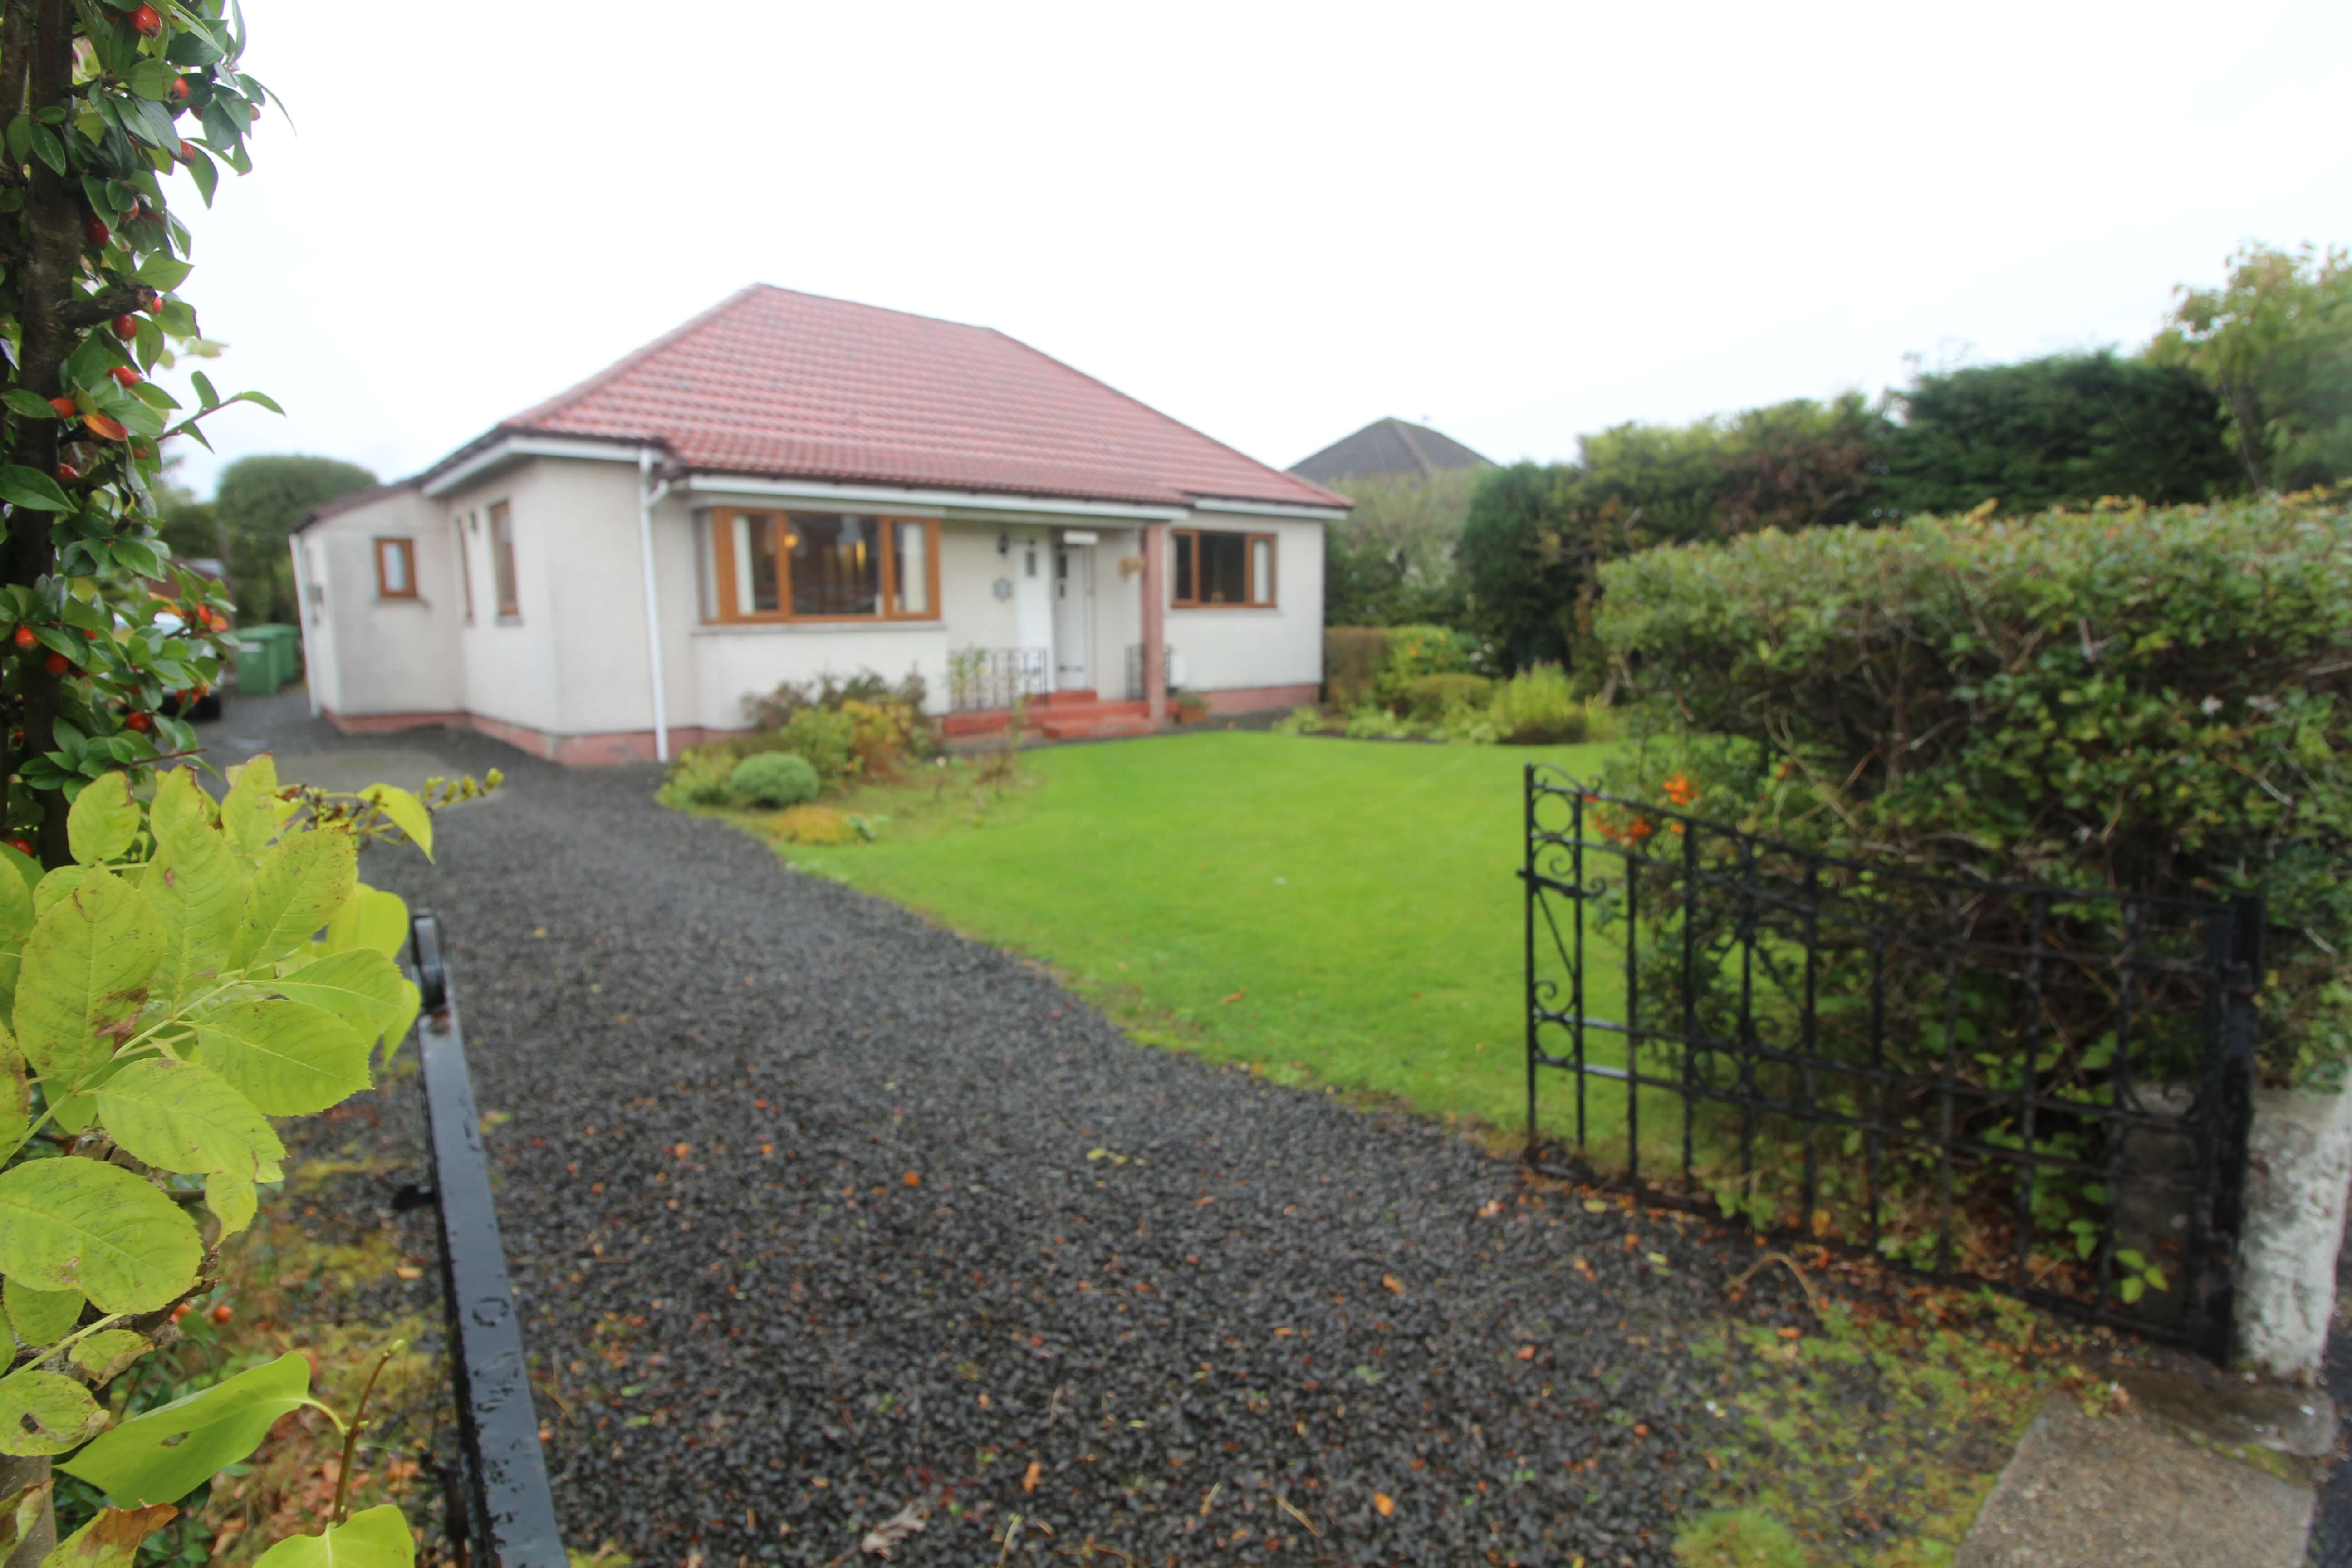 2 Bedroom House for Sale in Lenzie